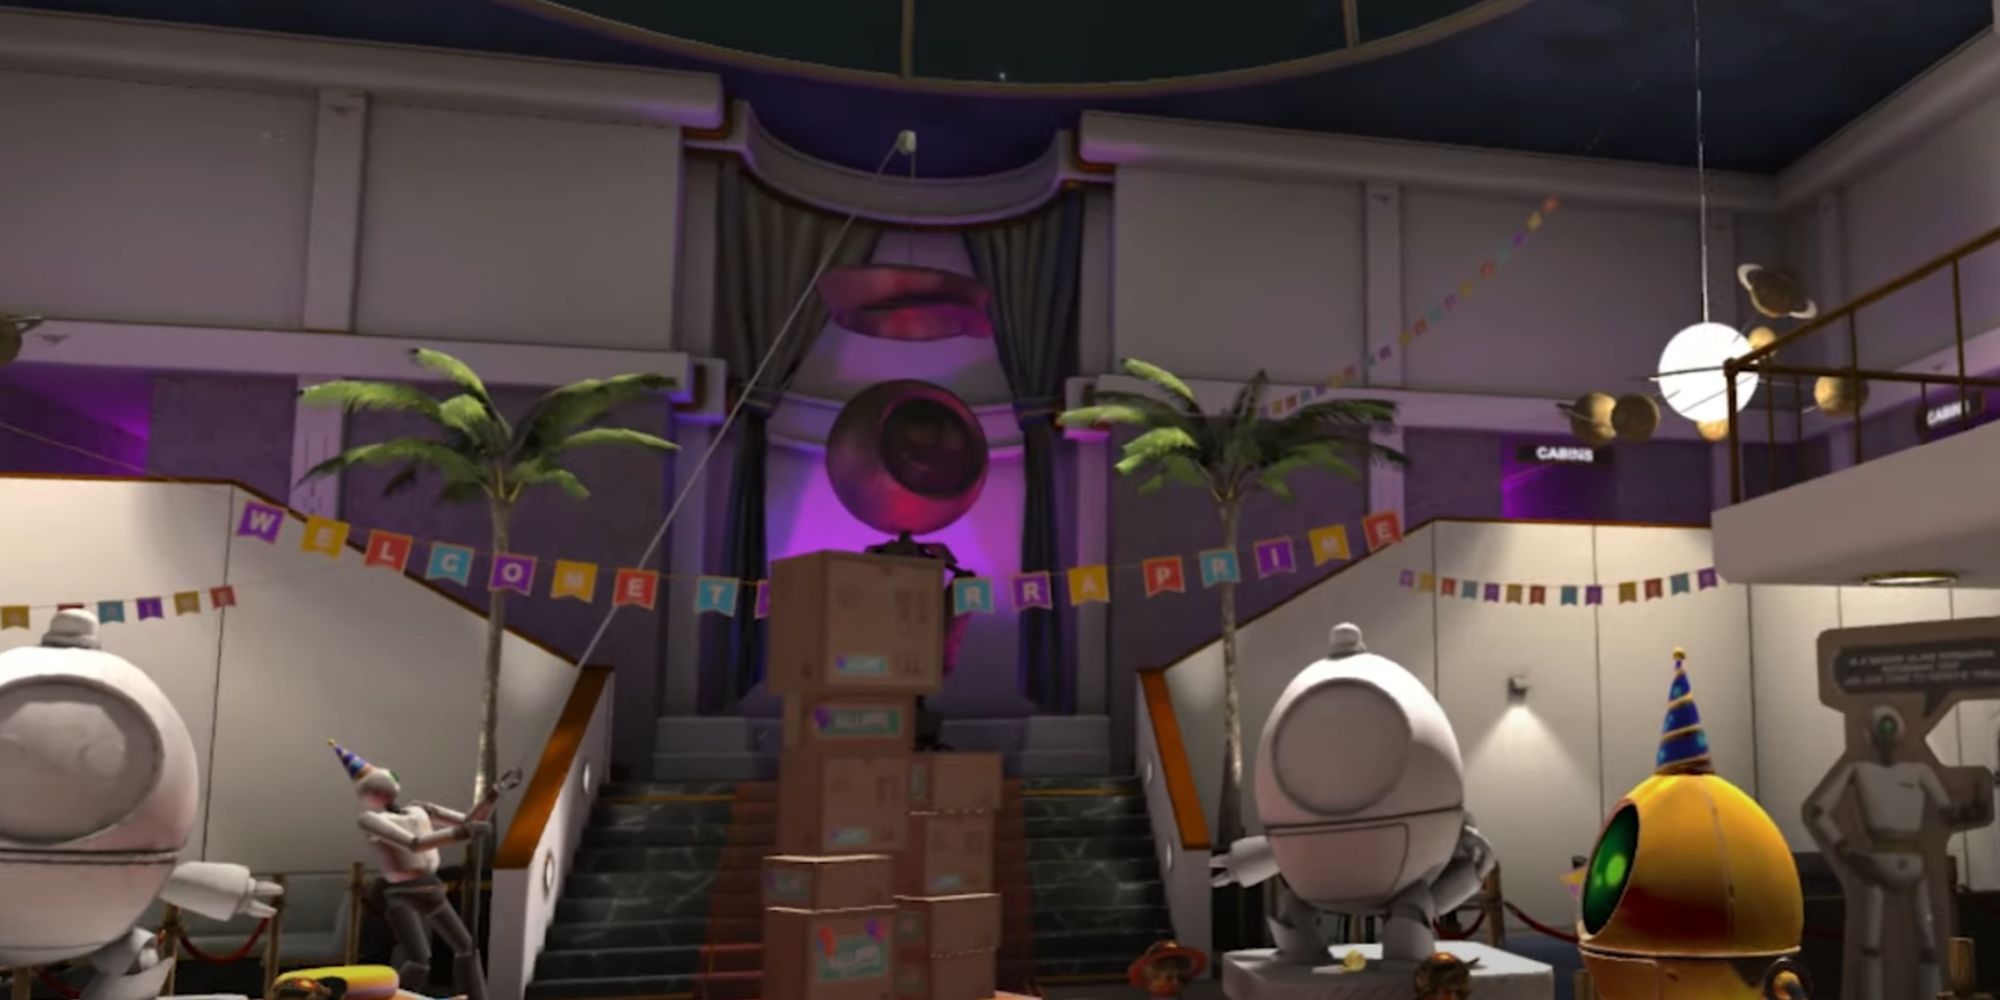 A Robot stands next to a staircase, while boxes are stacked on the stairs in Time Stall VR